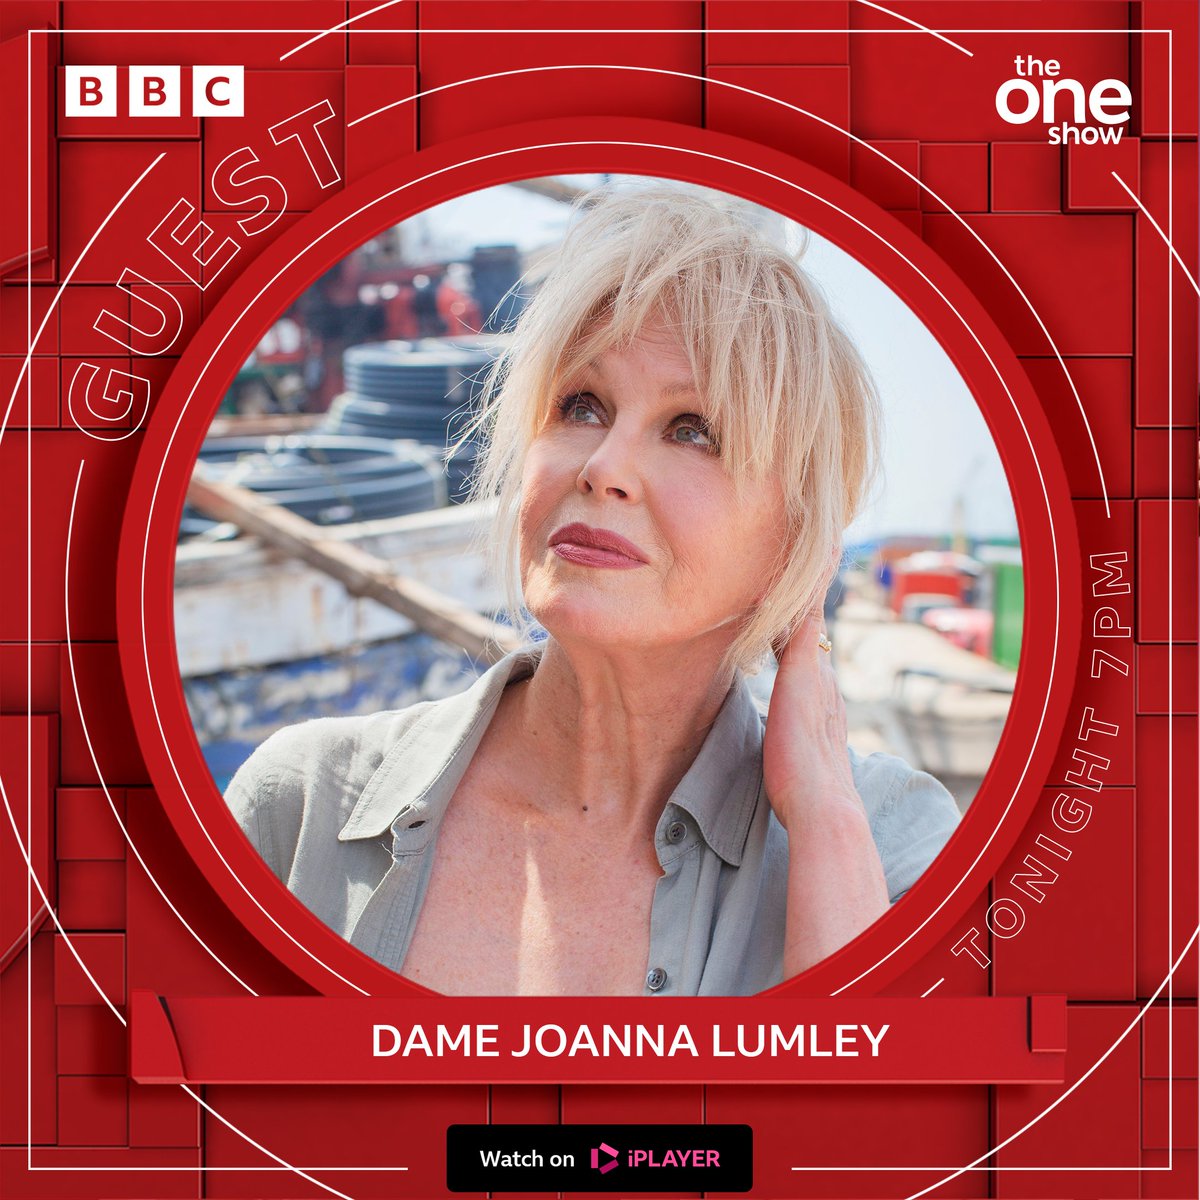 Joanna Lumley is embarking on an enchanting journey in ‘Joanna Lumley’s Spice Trail Adventure’. We’ll be hearing about the world’s greatest spice continents on tonight’s #TheOneShow on @BBCTwo 🌶️☀️ Got a question for her? Post it below 👇 or email theoneshow@bbc.co.uk 📩